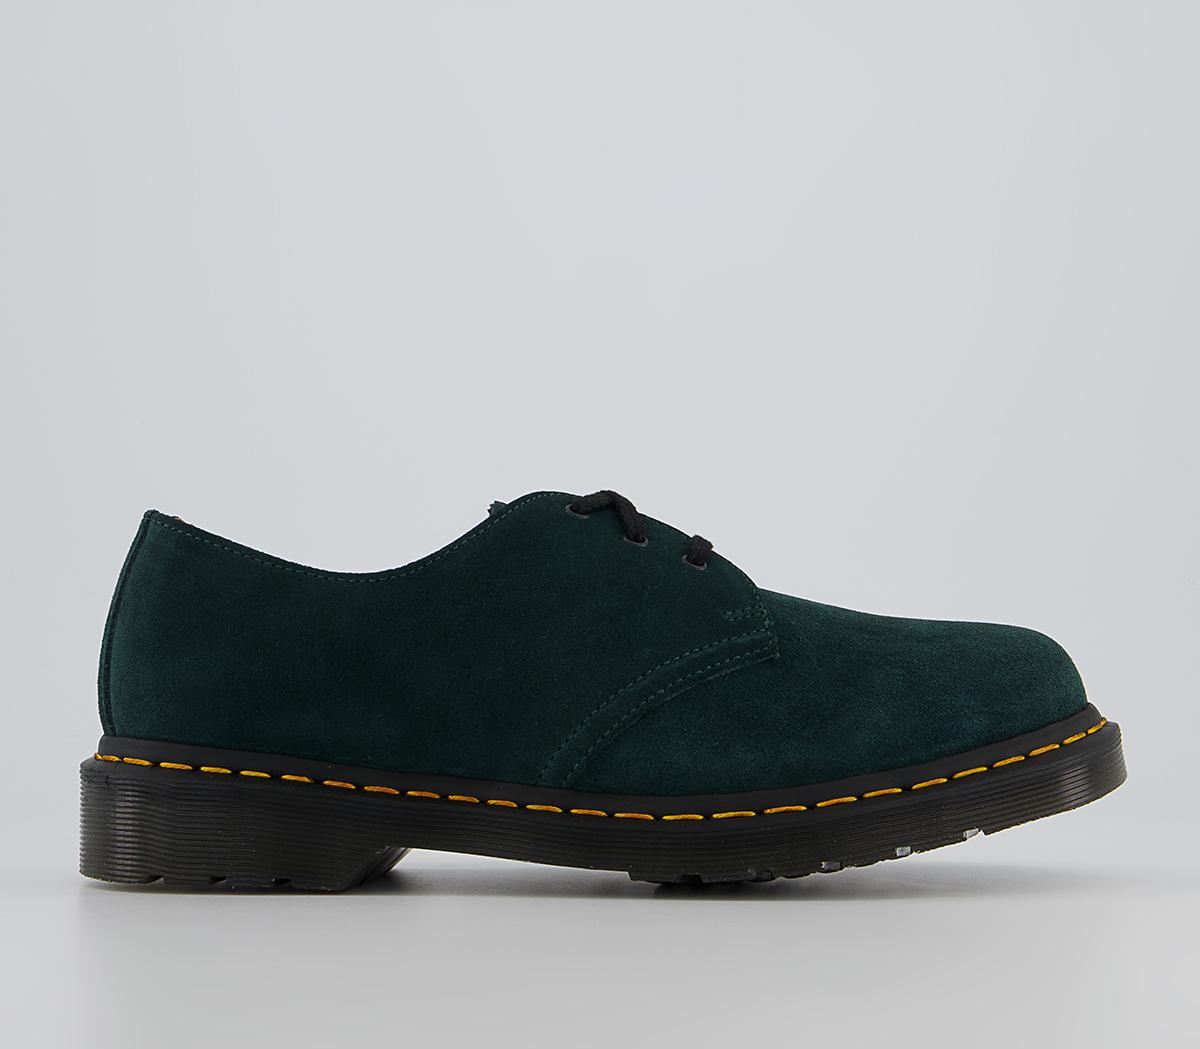 Dr. MartensDm 3 Eye Lace ShoesRacer Green Eh Suede